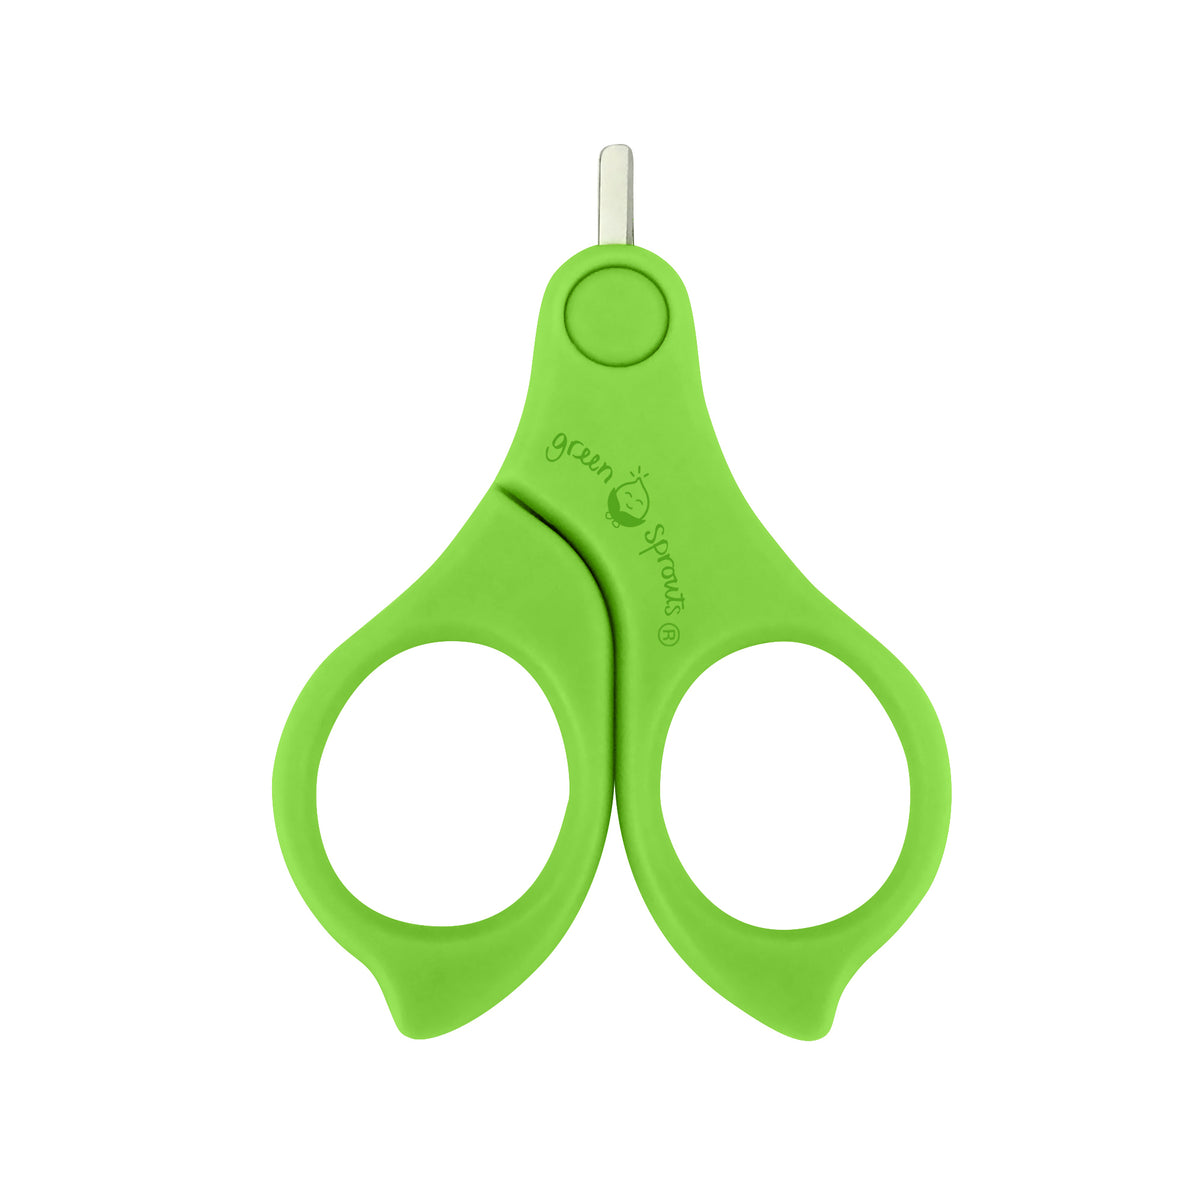 GREEN BELL NAIL SCISSORS FOR BABY BA-001 - TESOLIFE特搜商城